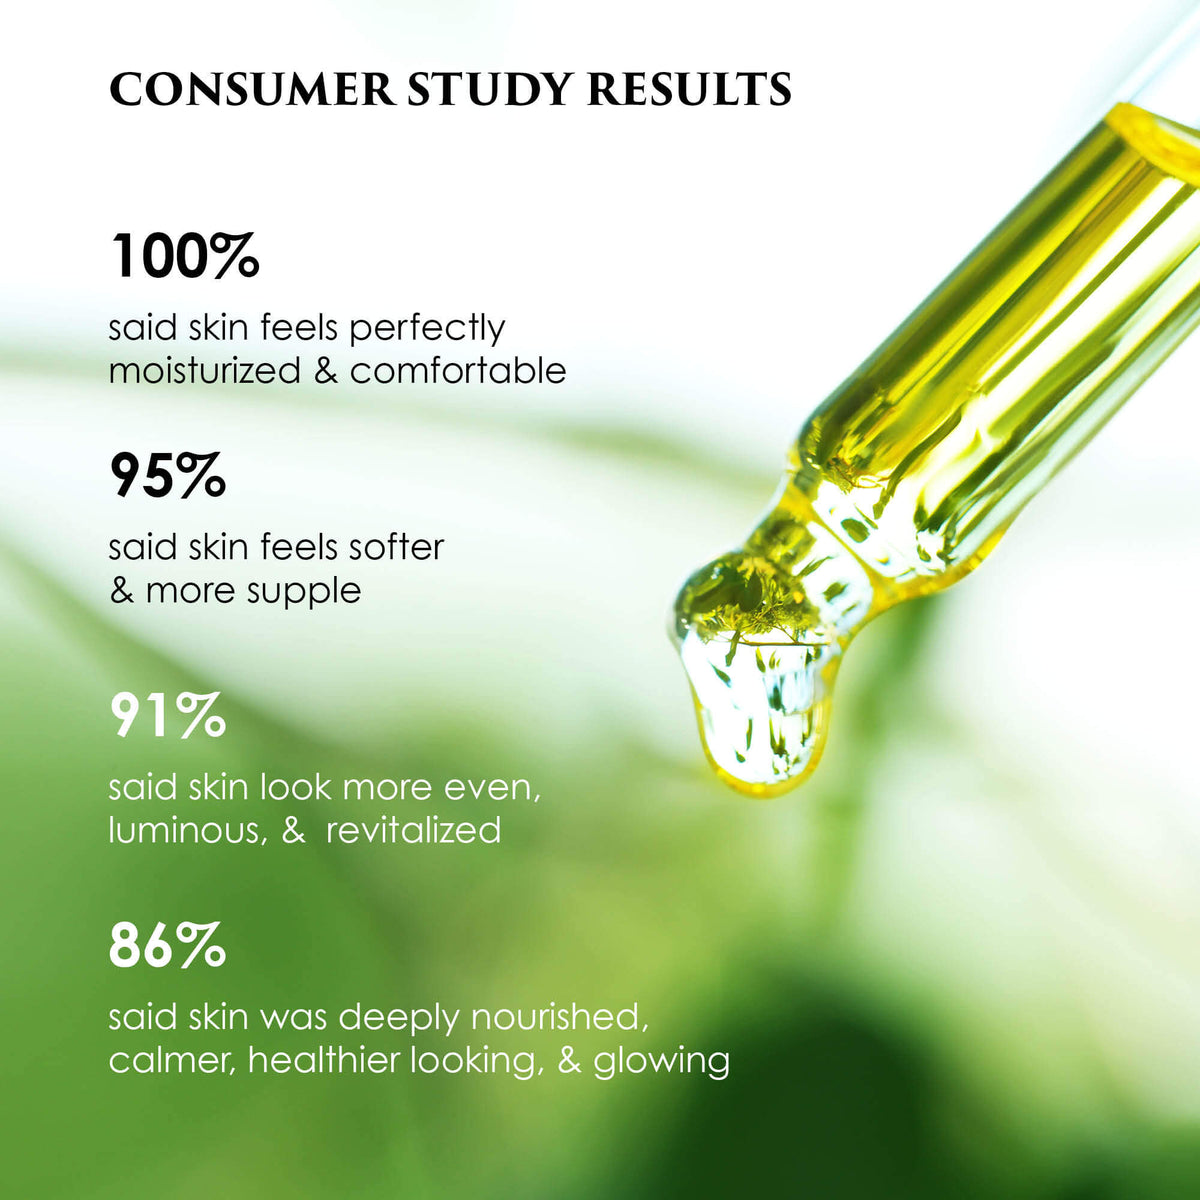 Image of test tub dropper dispensing oil against a blurry green a d white background.  Captions show the clinical results of the product.  For example, 100% said this product left their skin moisturized.  95% said their skin felt softer and more supple.